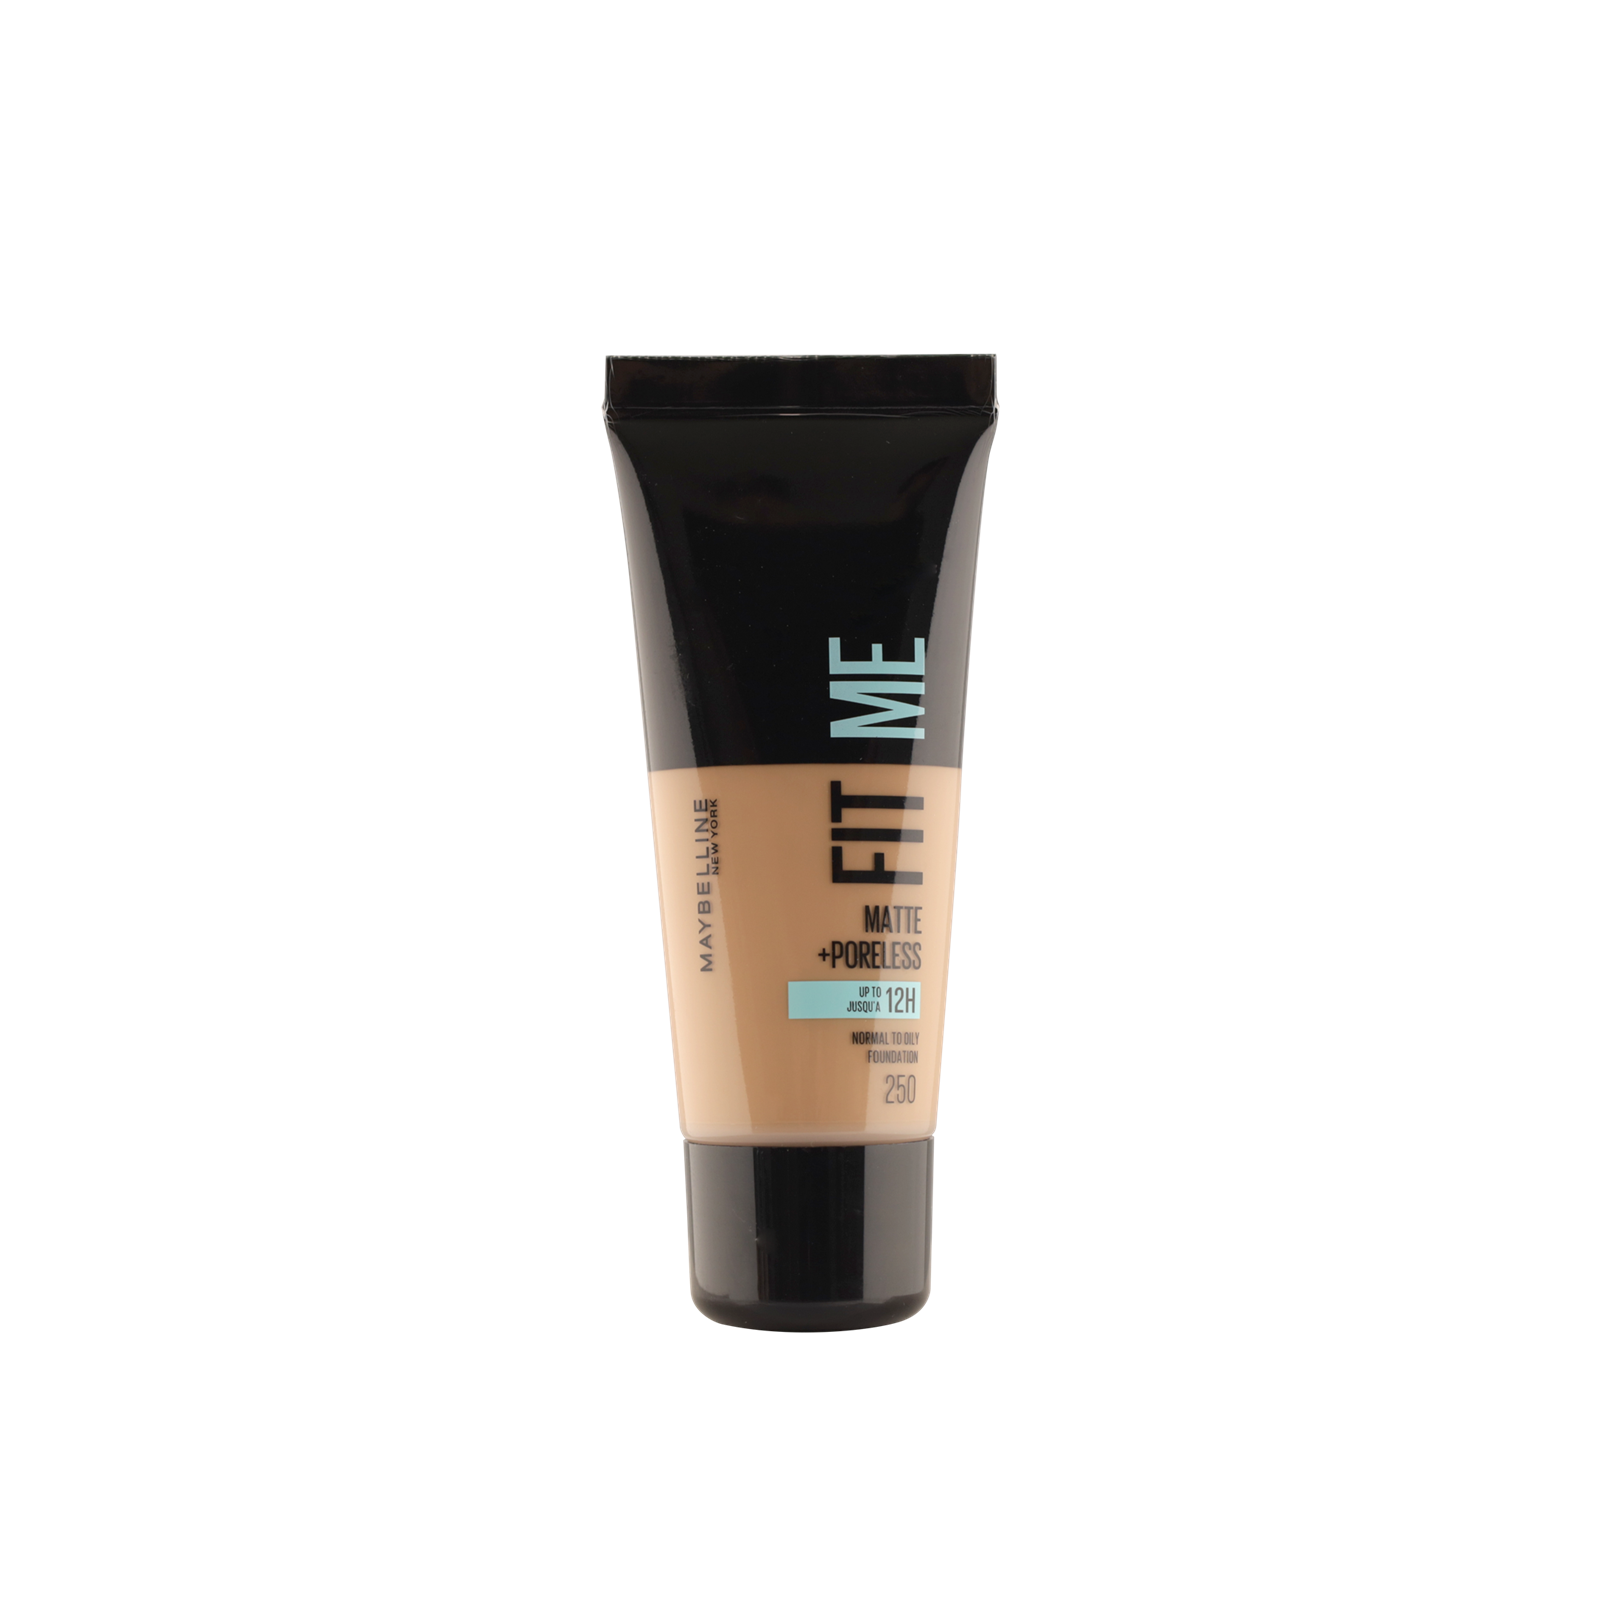 Maybelline Fit Me Liquid Foundation 250 Sun Beige - اندروميدا